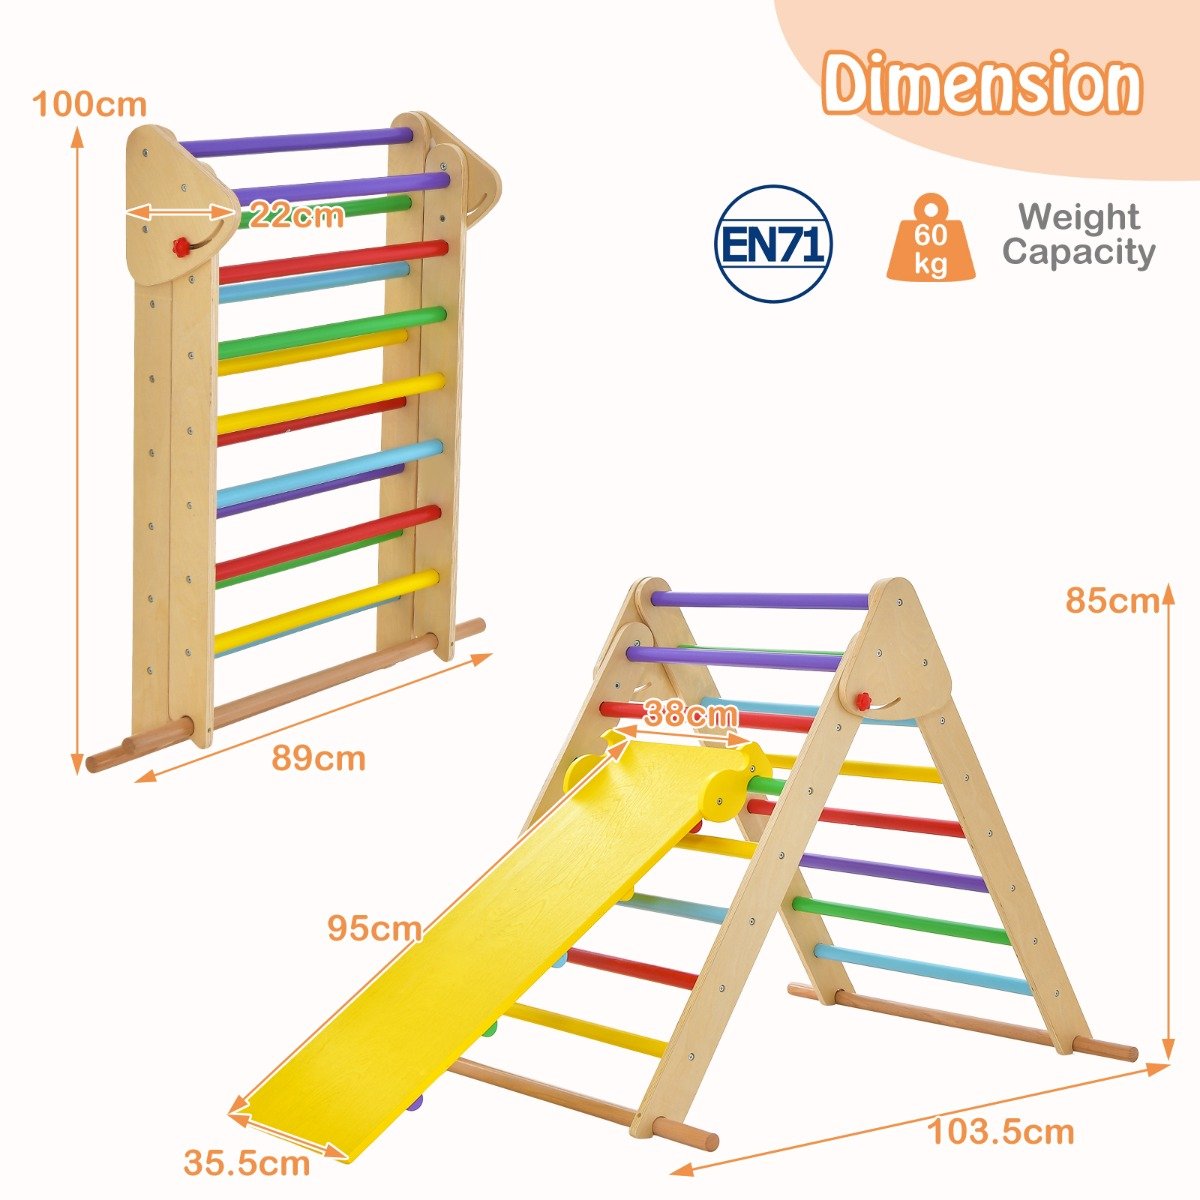 Shop Now for the Multi Colour Climbing Triangle